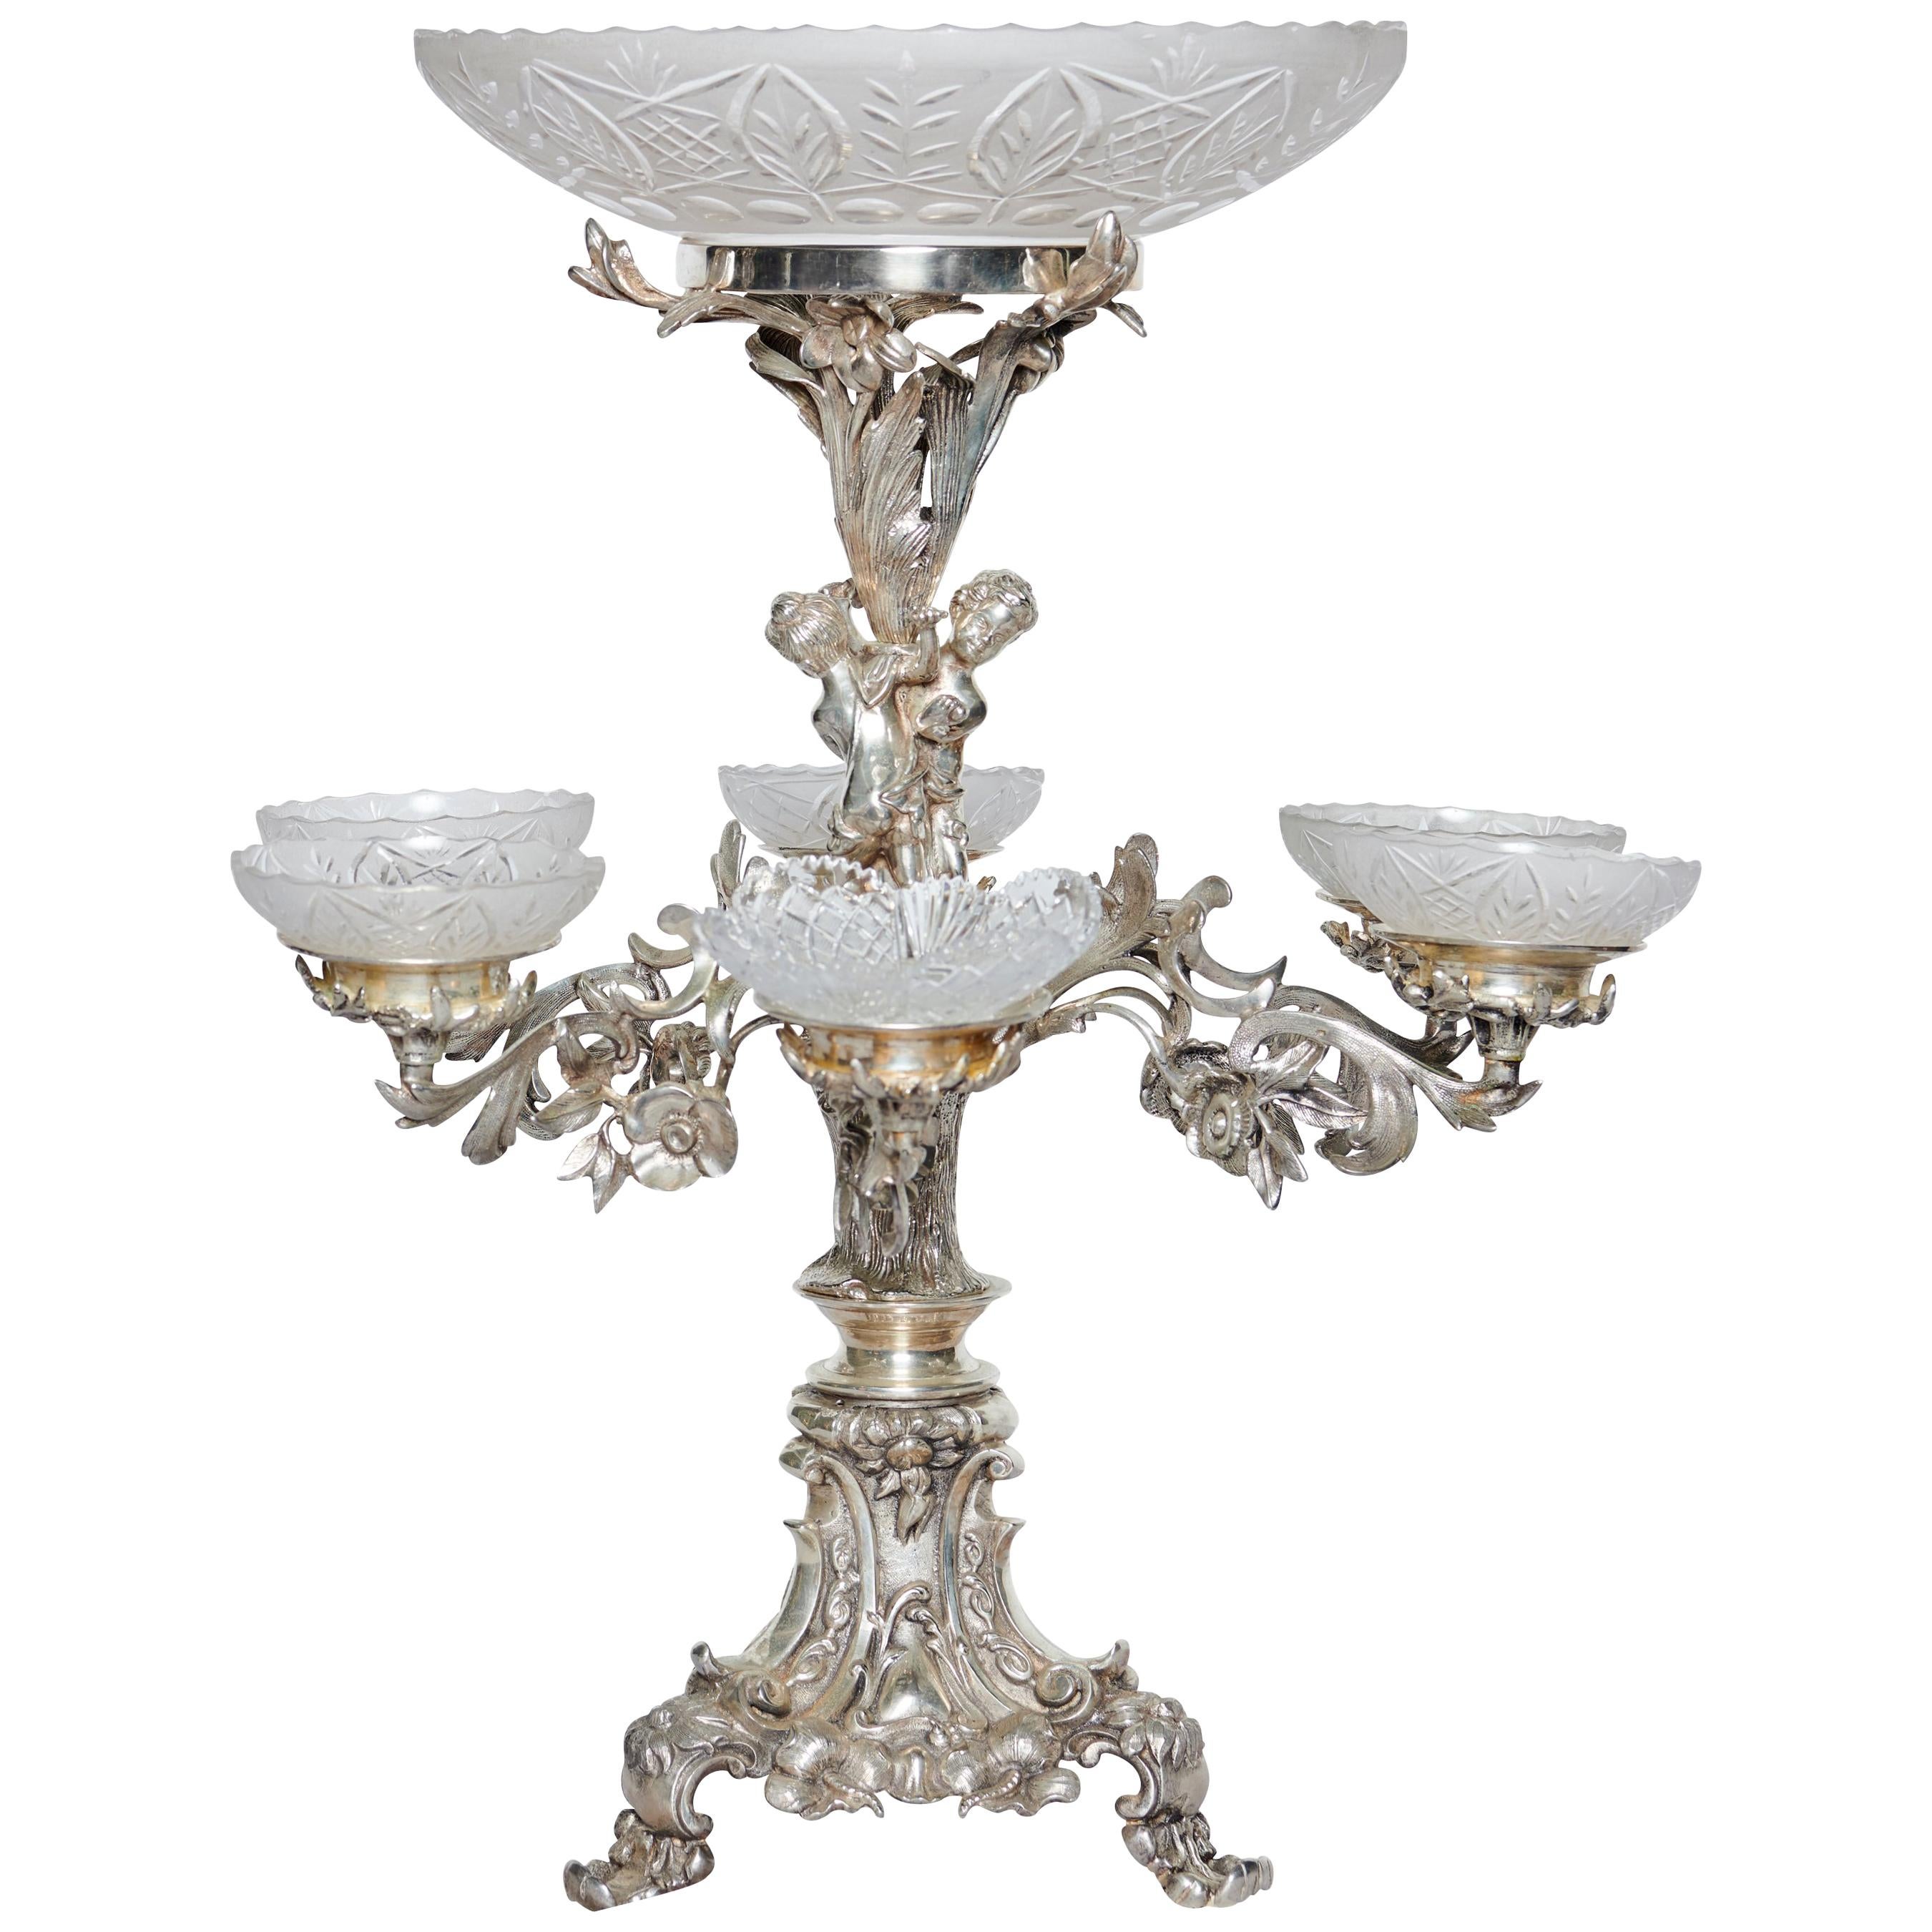 19th Century, English Silver and Crystal Figural Epergne For Sale